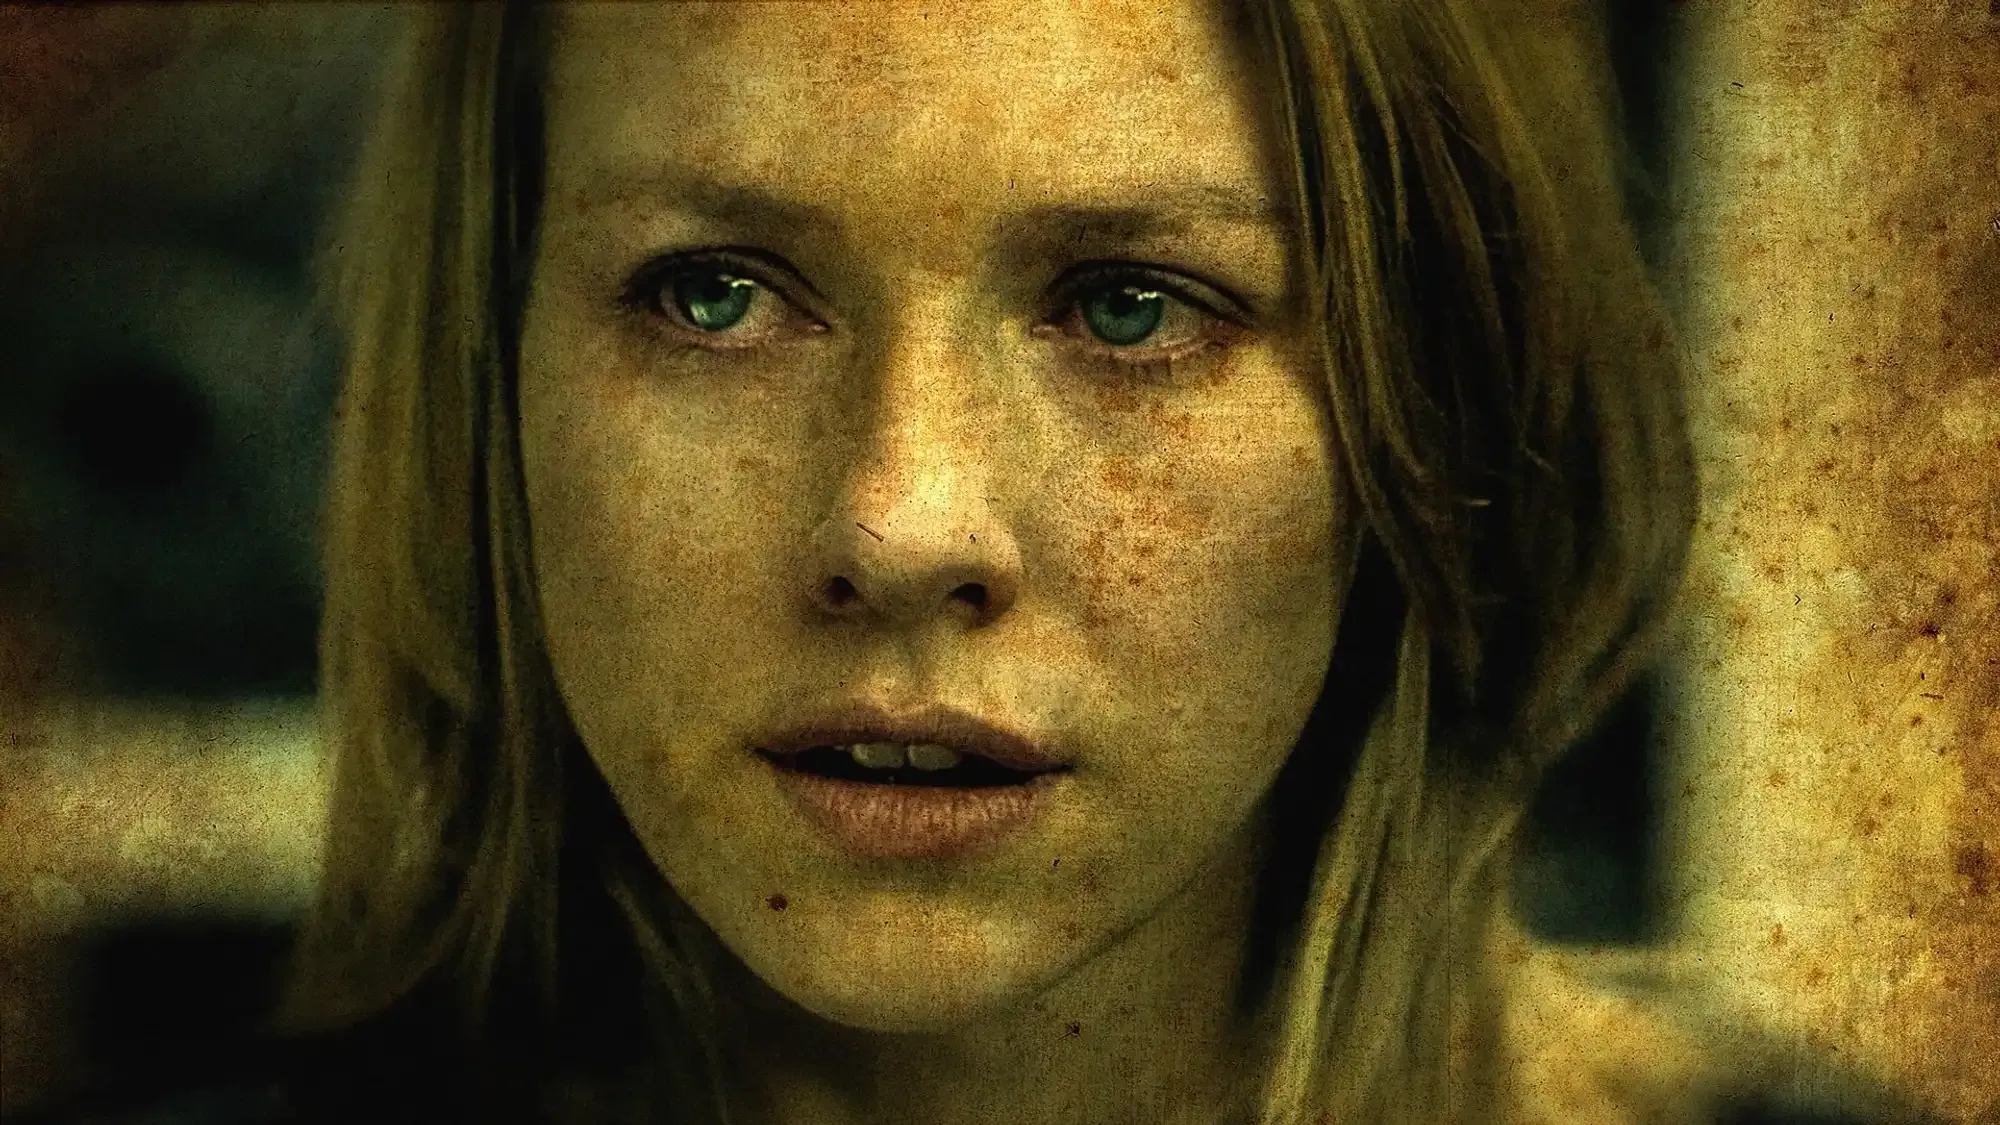 21 Grams movie review